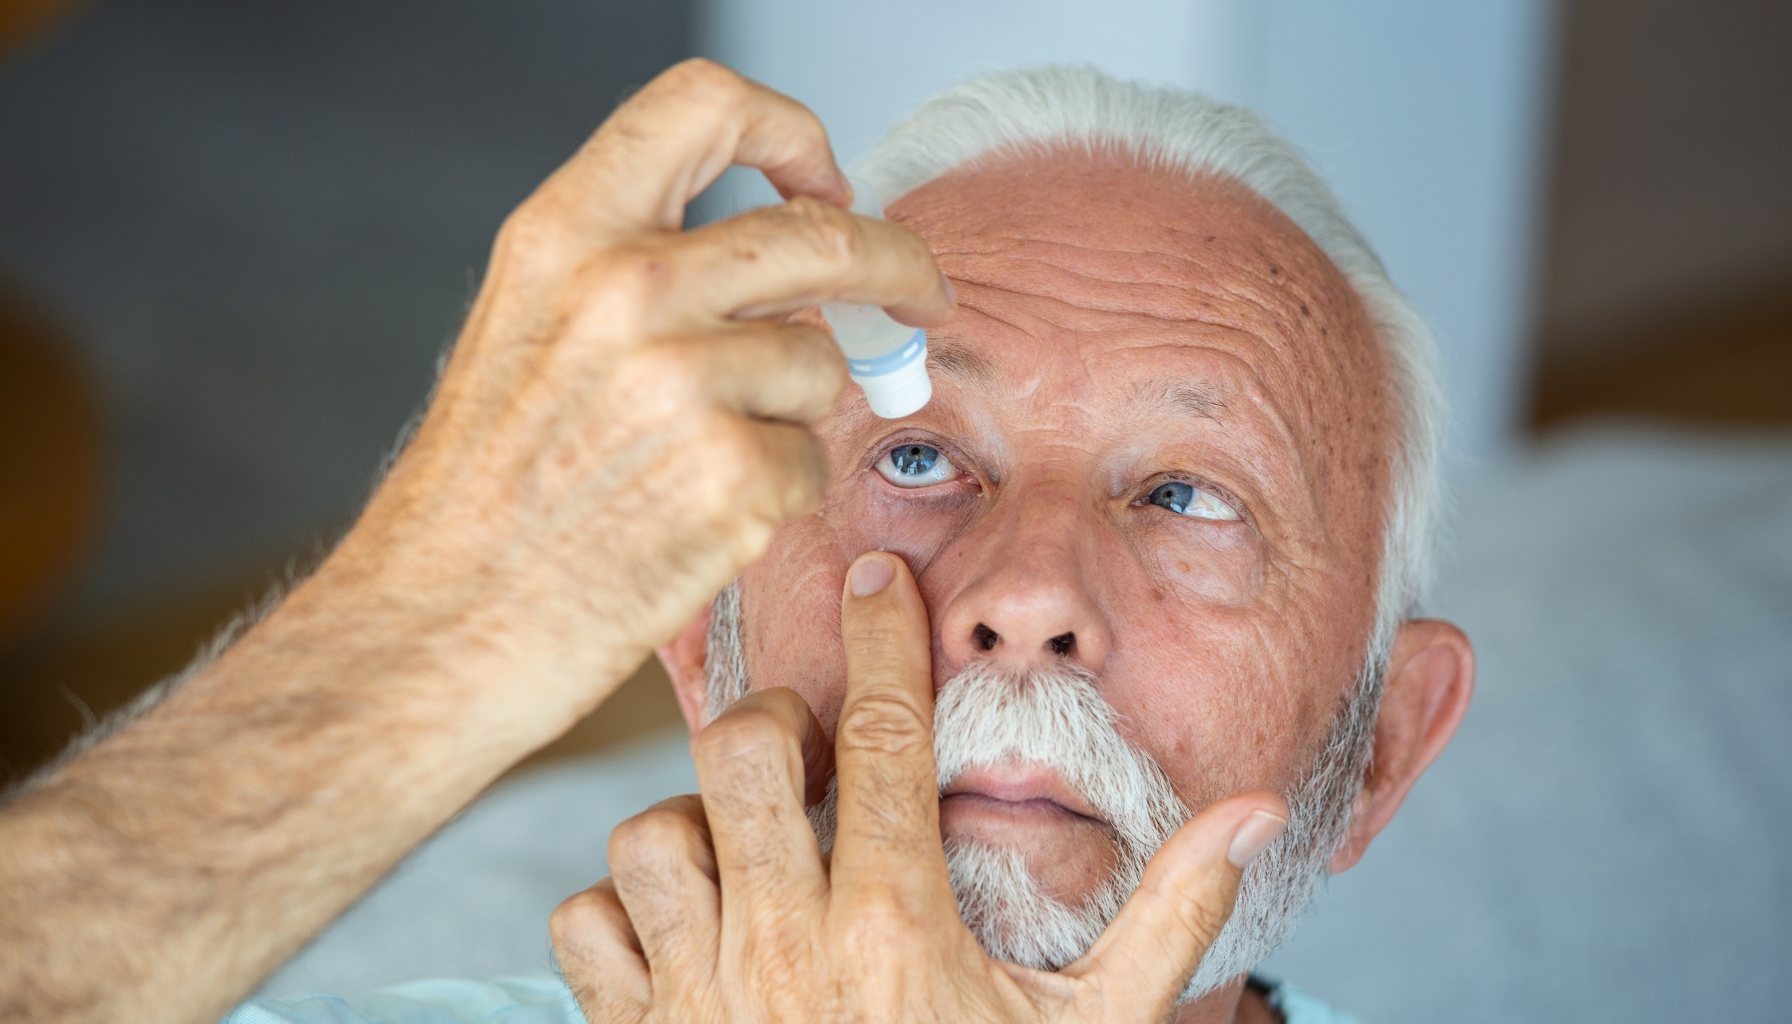 Person applying post-operative eye drops after cataract surgery